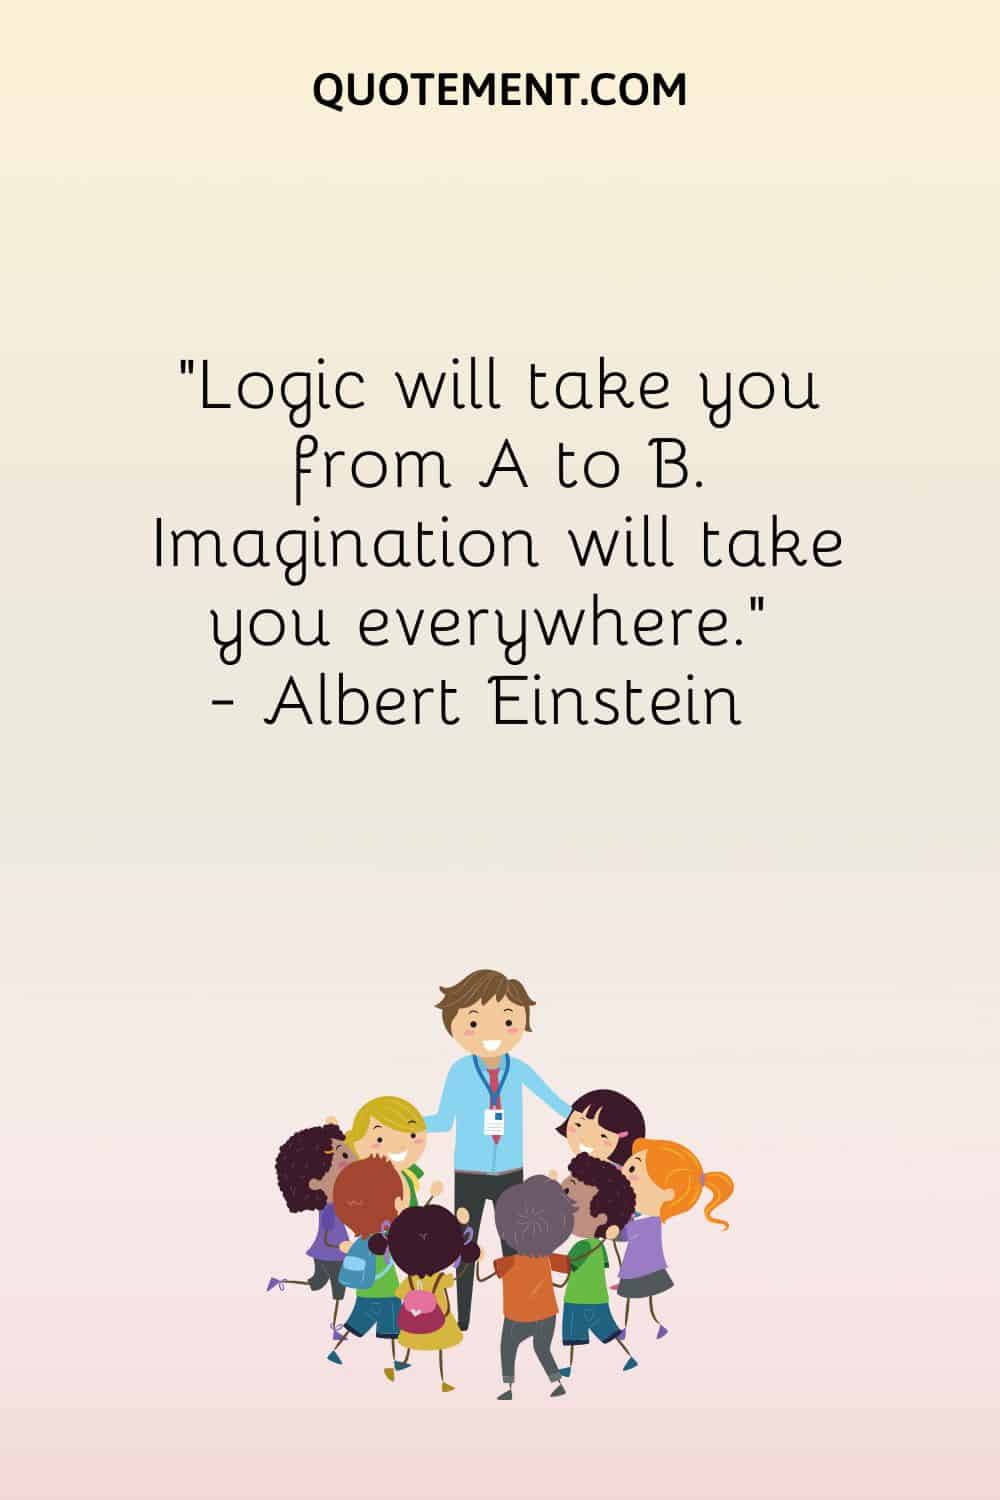 Logic will take you from A to B. Imagination will take you everywhere